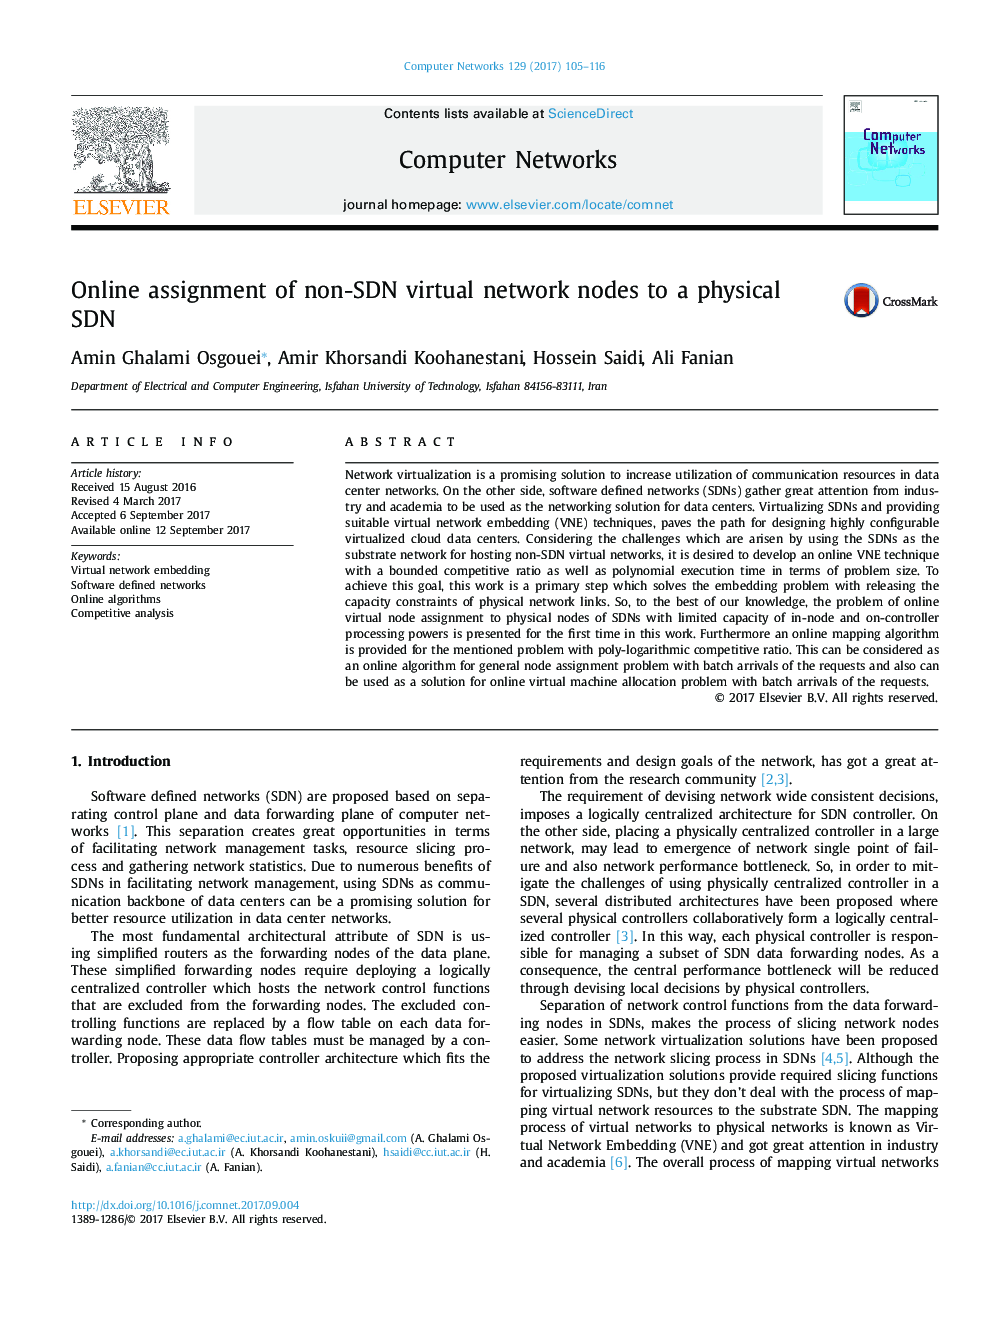 Online assignment of non-SDN virtual network nodes to a physical SDN